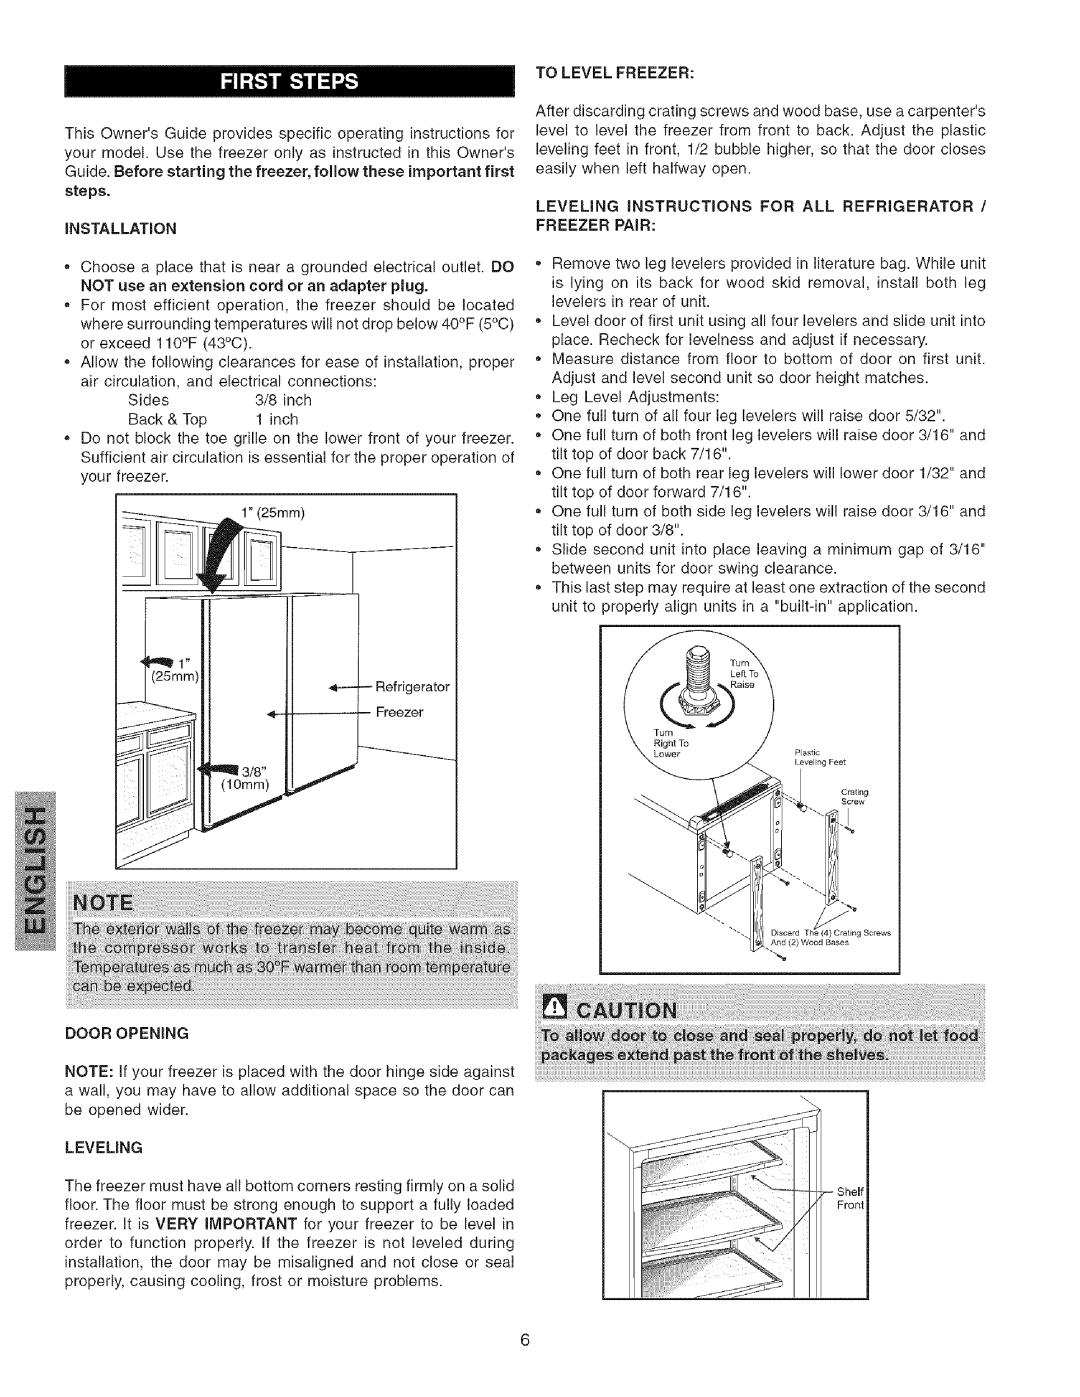 Kenmore 25344133801 steps INSTALLATION, To Level Freezer, Leveling Instructions For All Refrigerator, Freezer Pair 